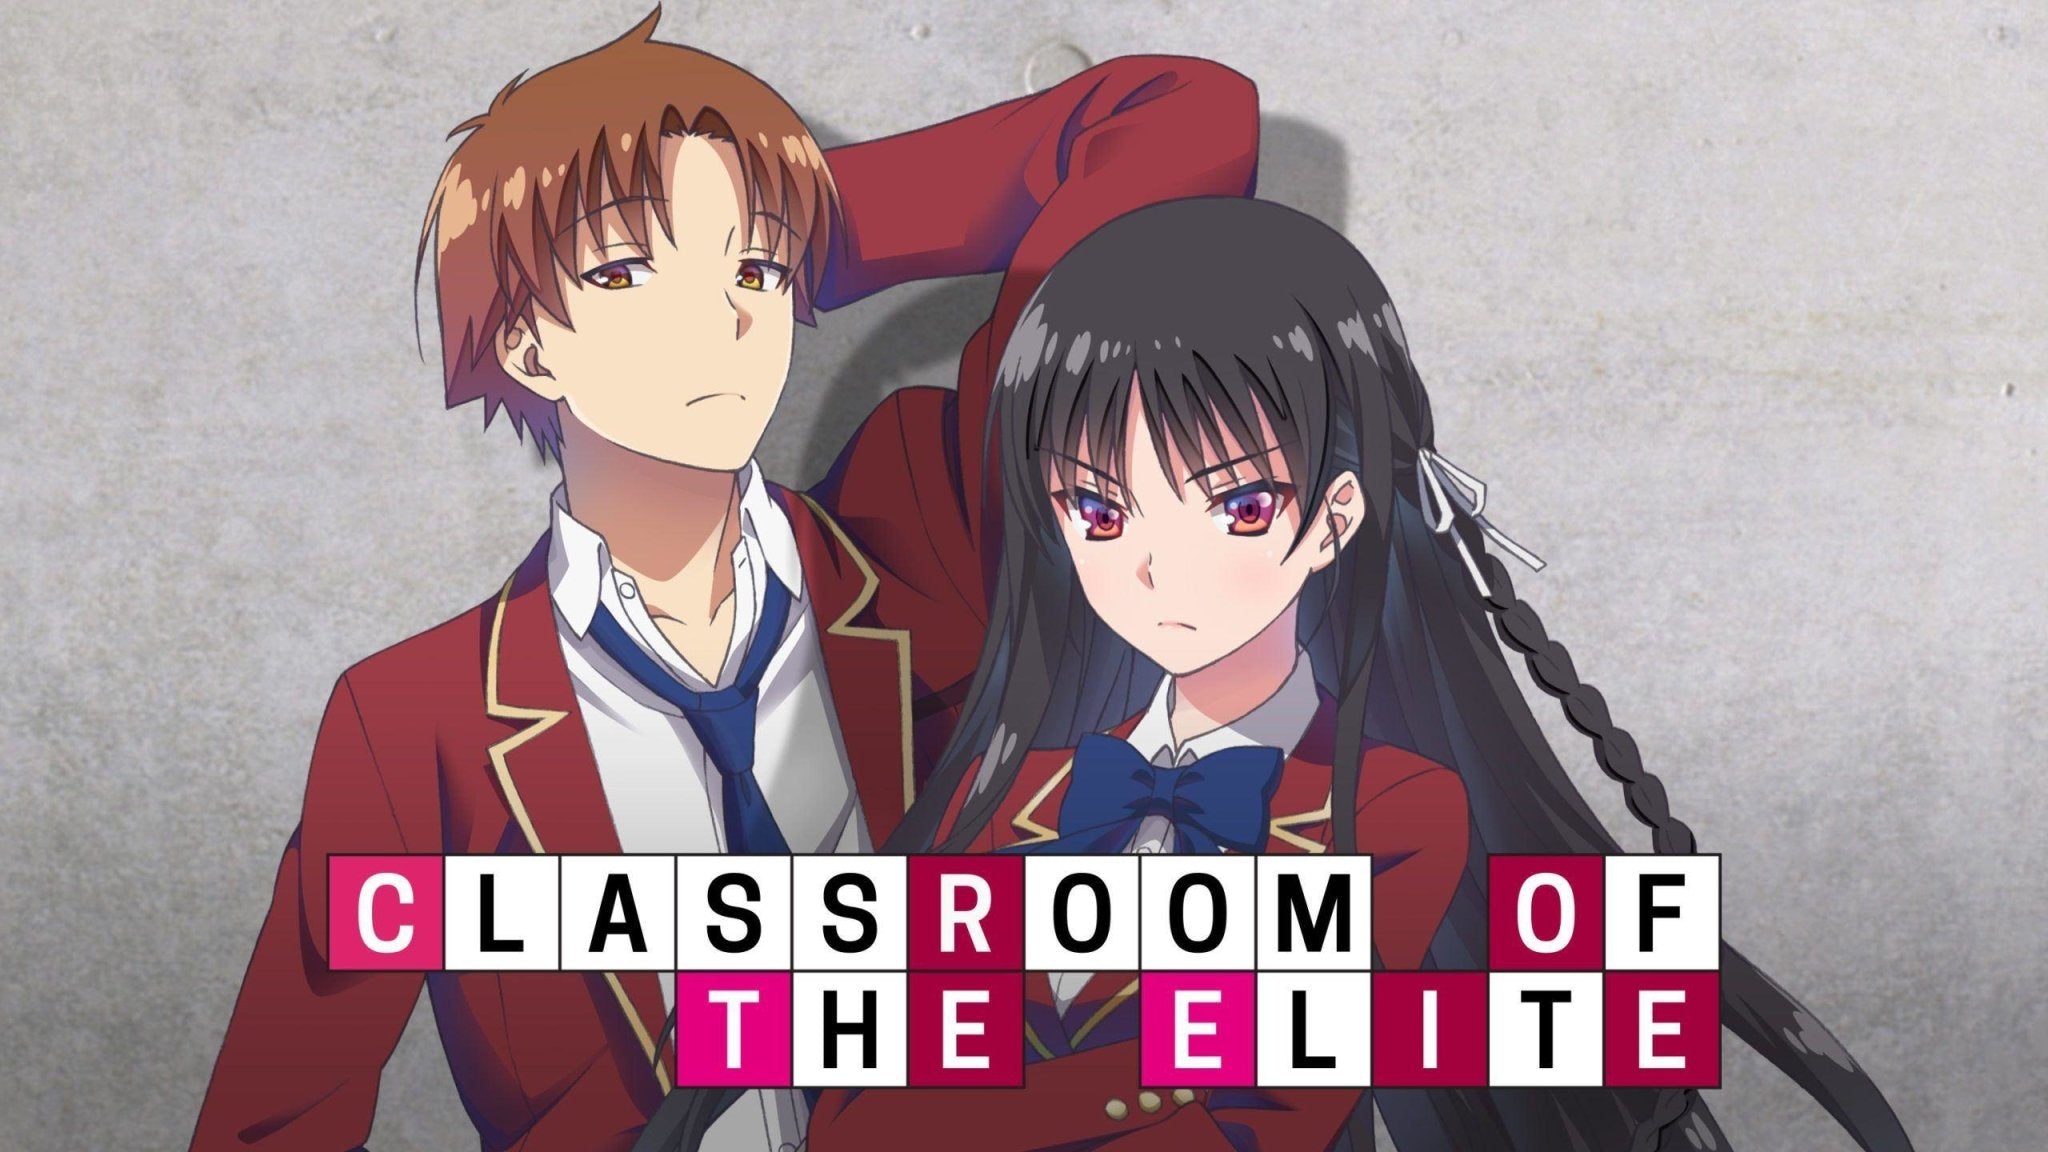 Classroom Of The Elite Season 2 Episode 1 Review: New Beginnings